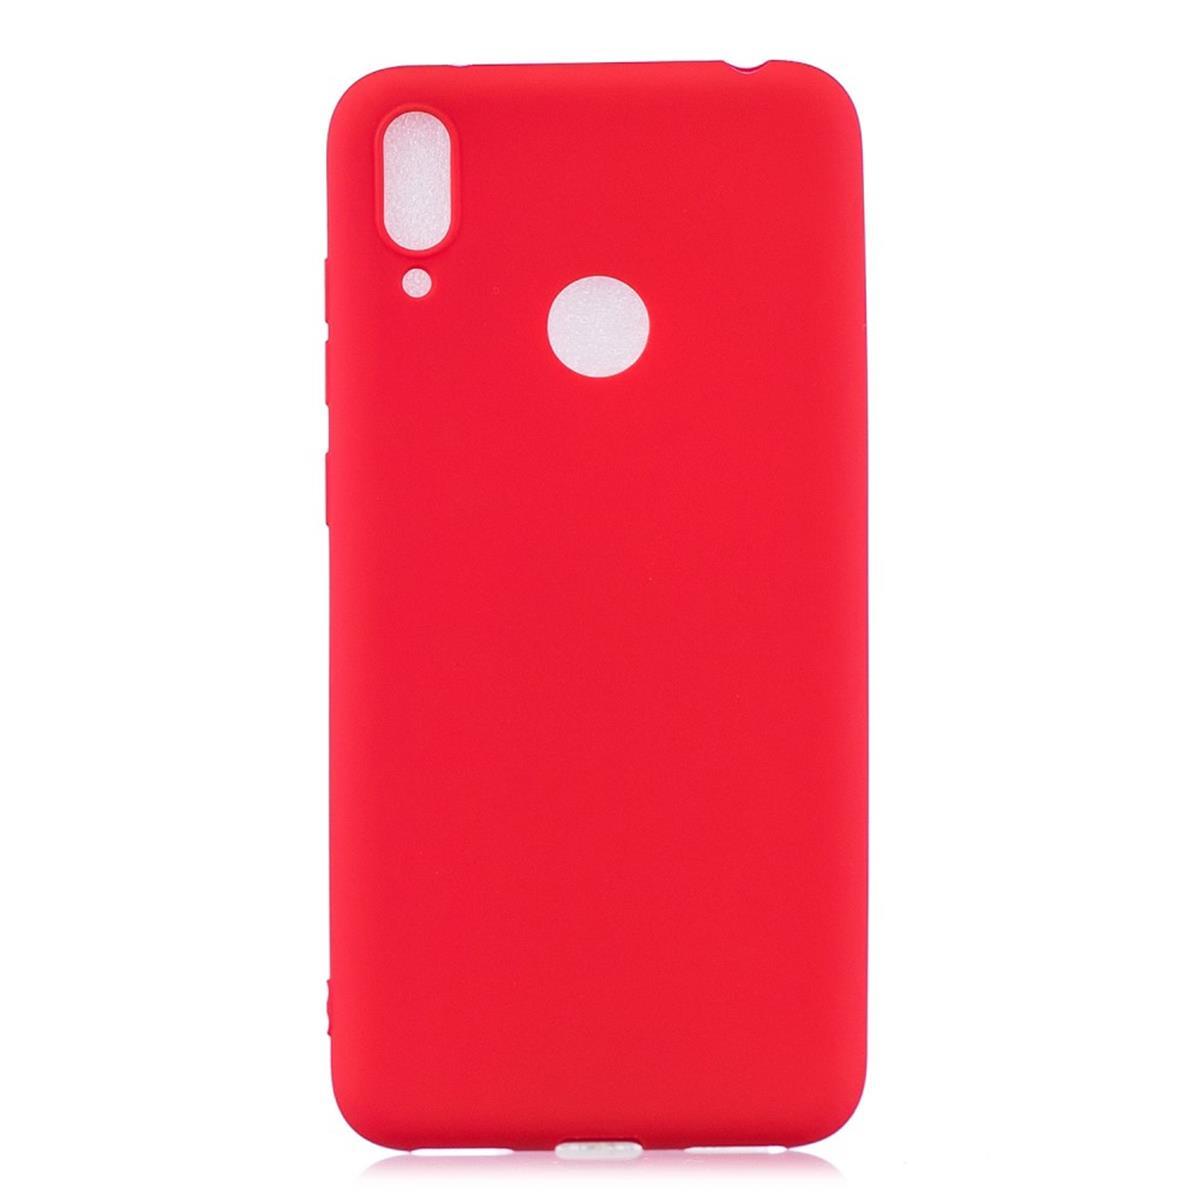 COVERKINGZ Handycase (2019), aus Silikon, Huawei, Rot Backcover, Y7